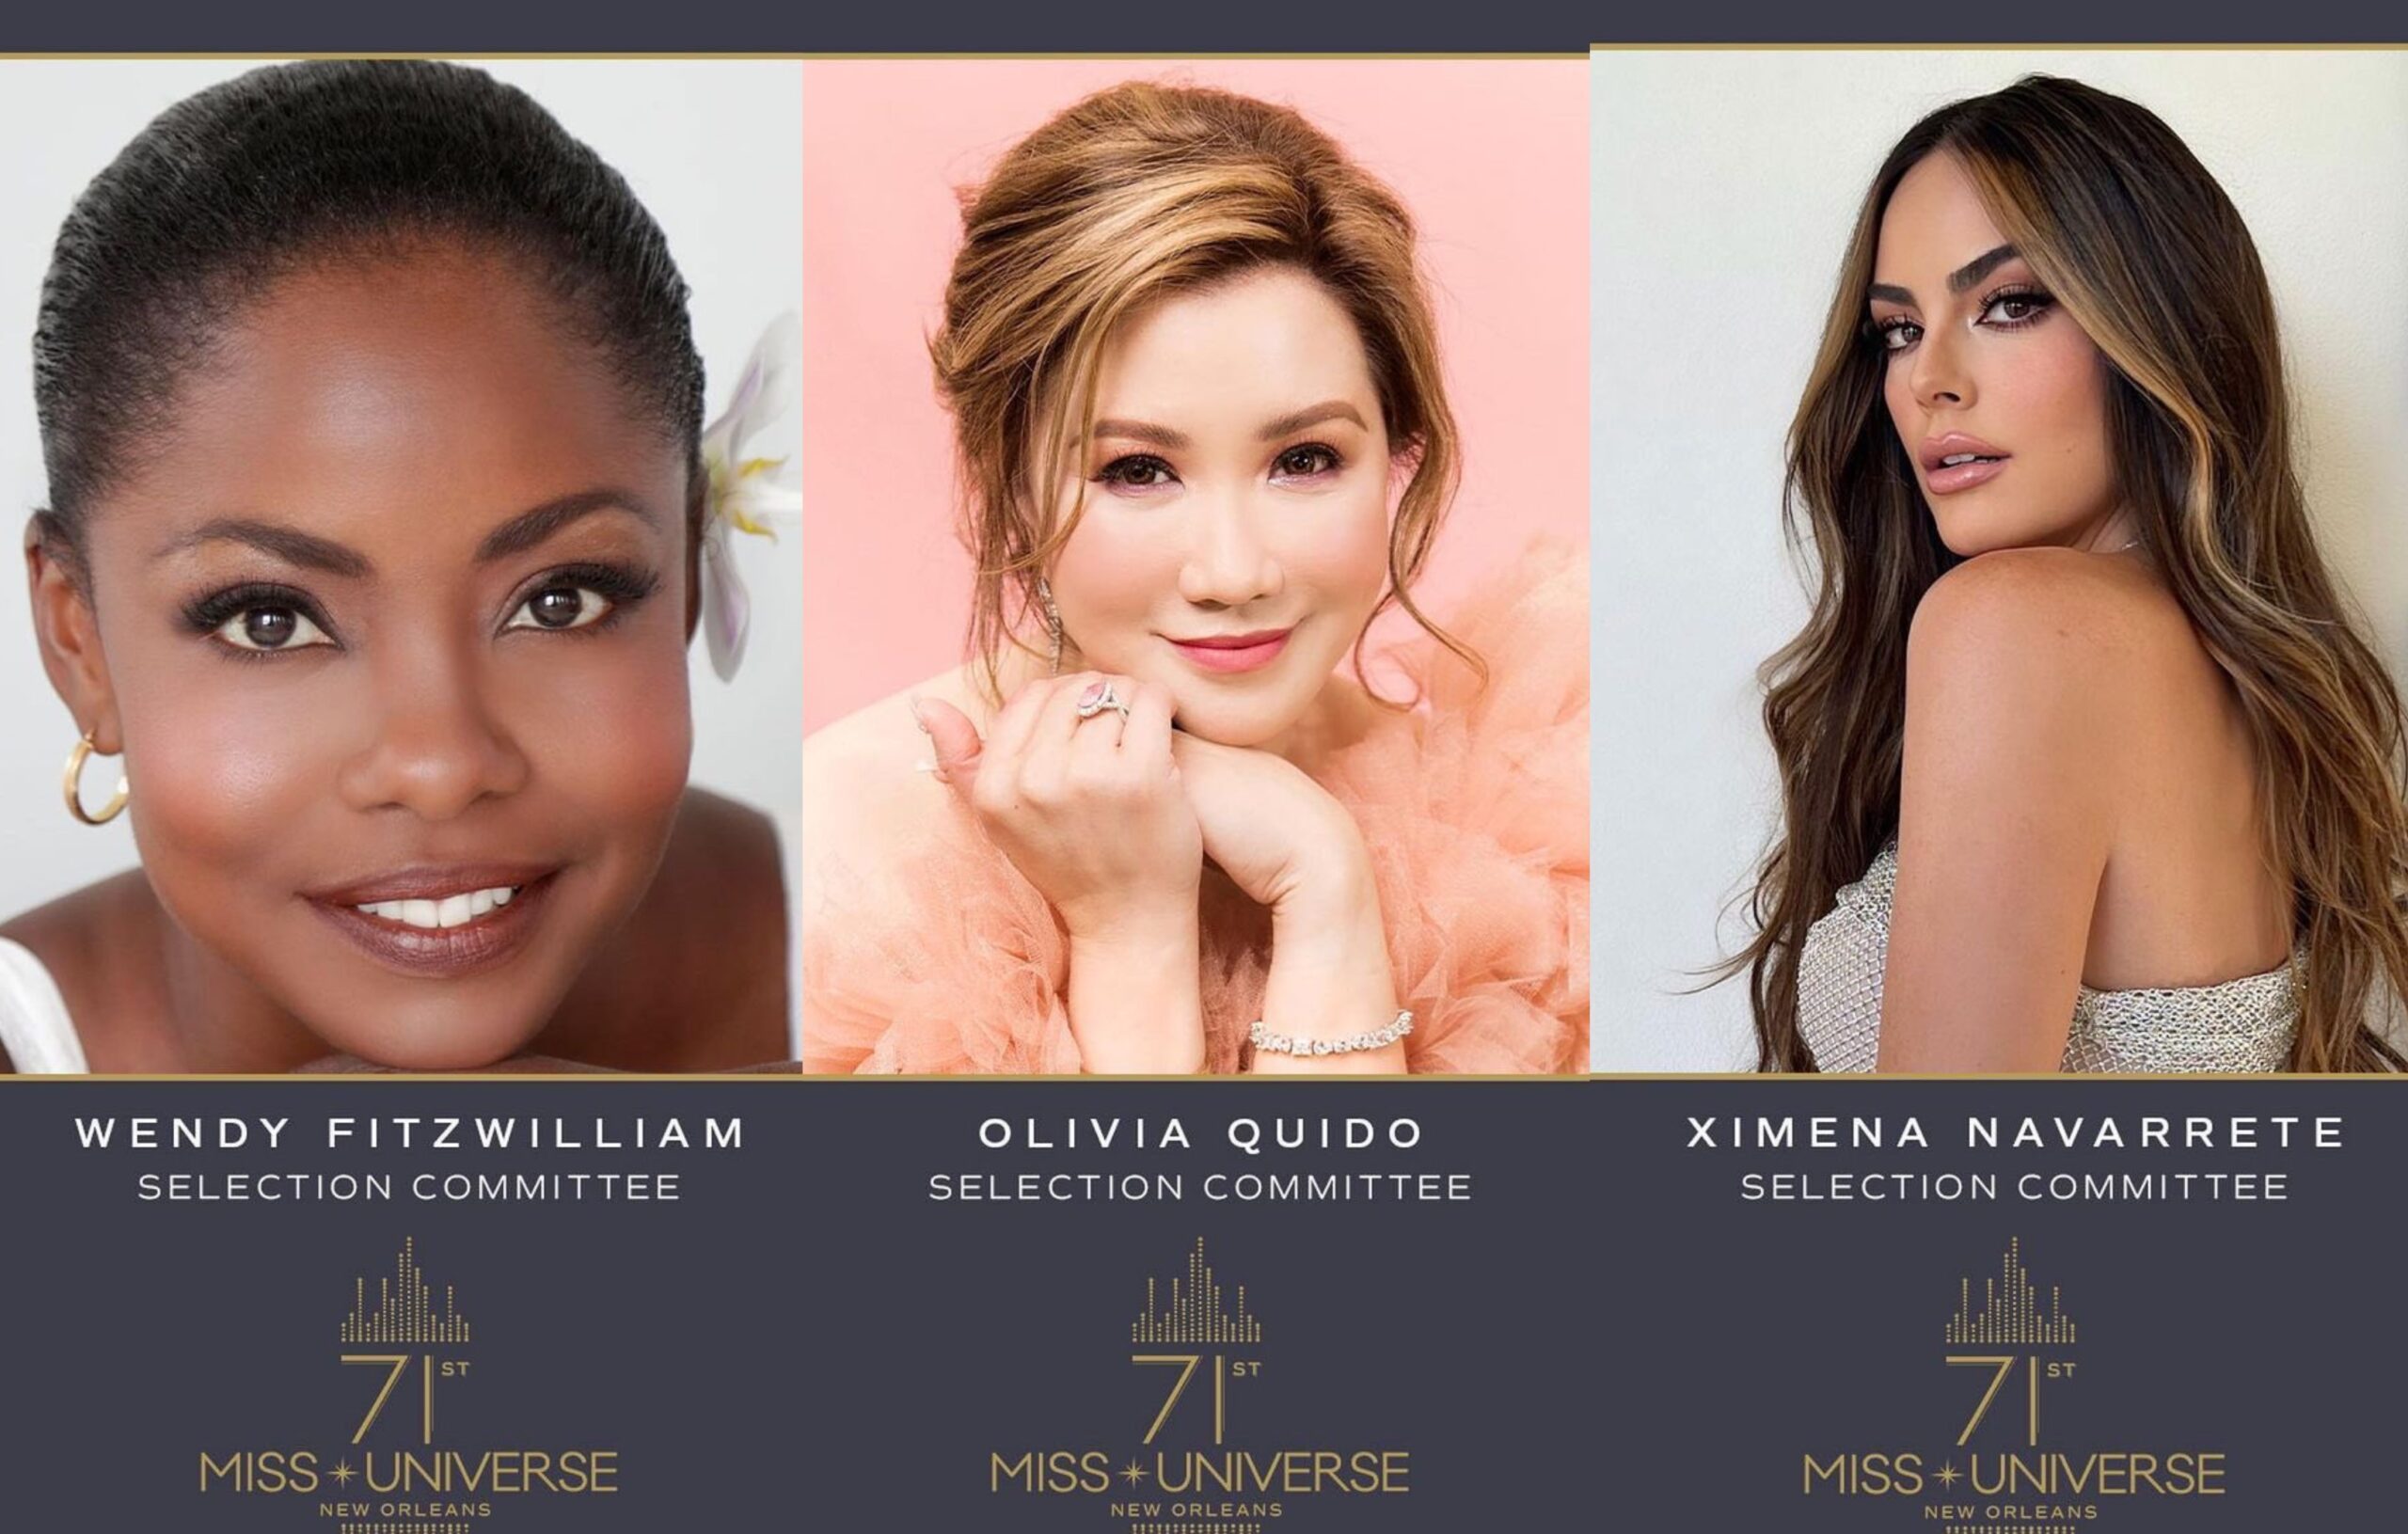 LOOK: Miss Universe unveils all-female selection committee for 2022 pageant